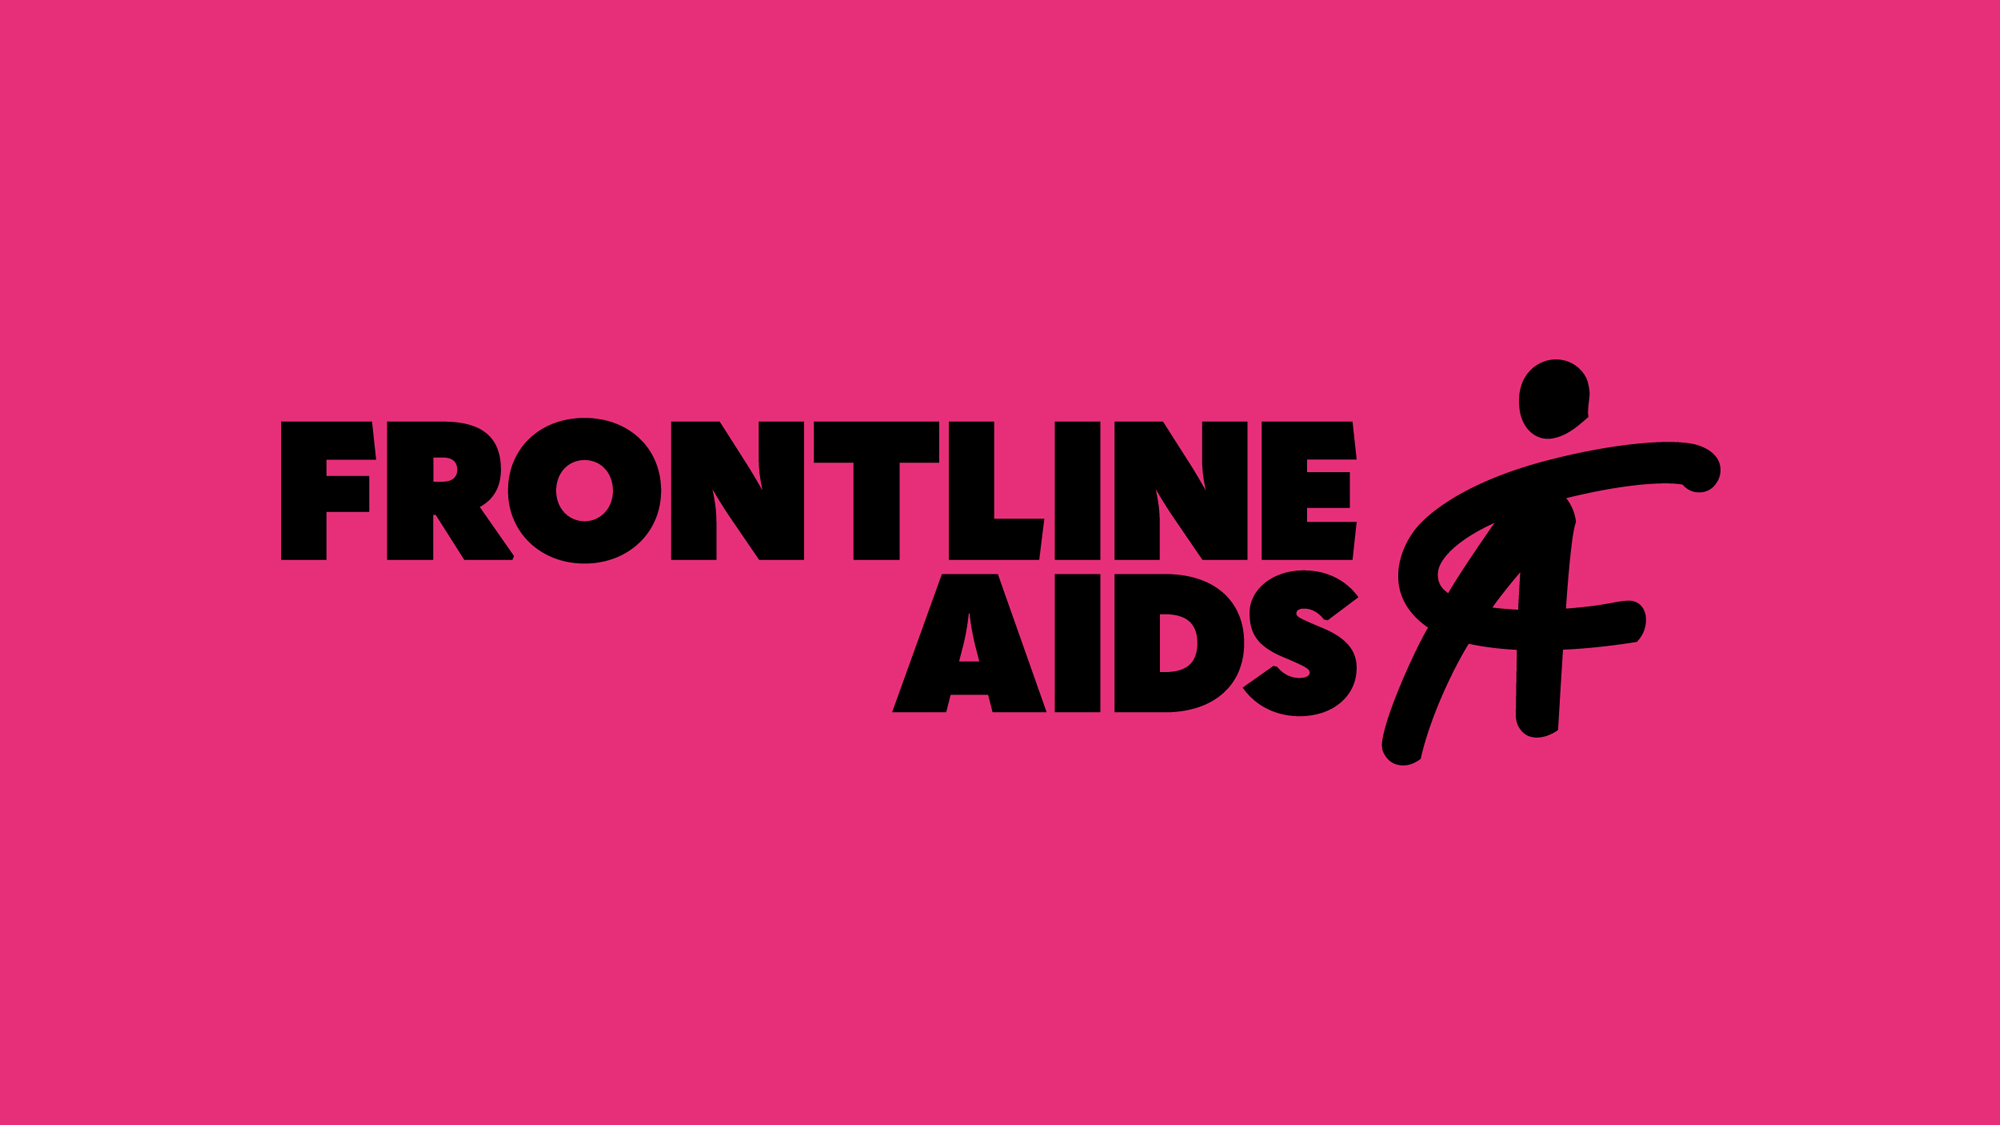 Aids Logo - Brand New: New Logo and Identity for Frontline Aids by Brandpie